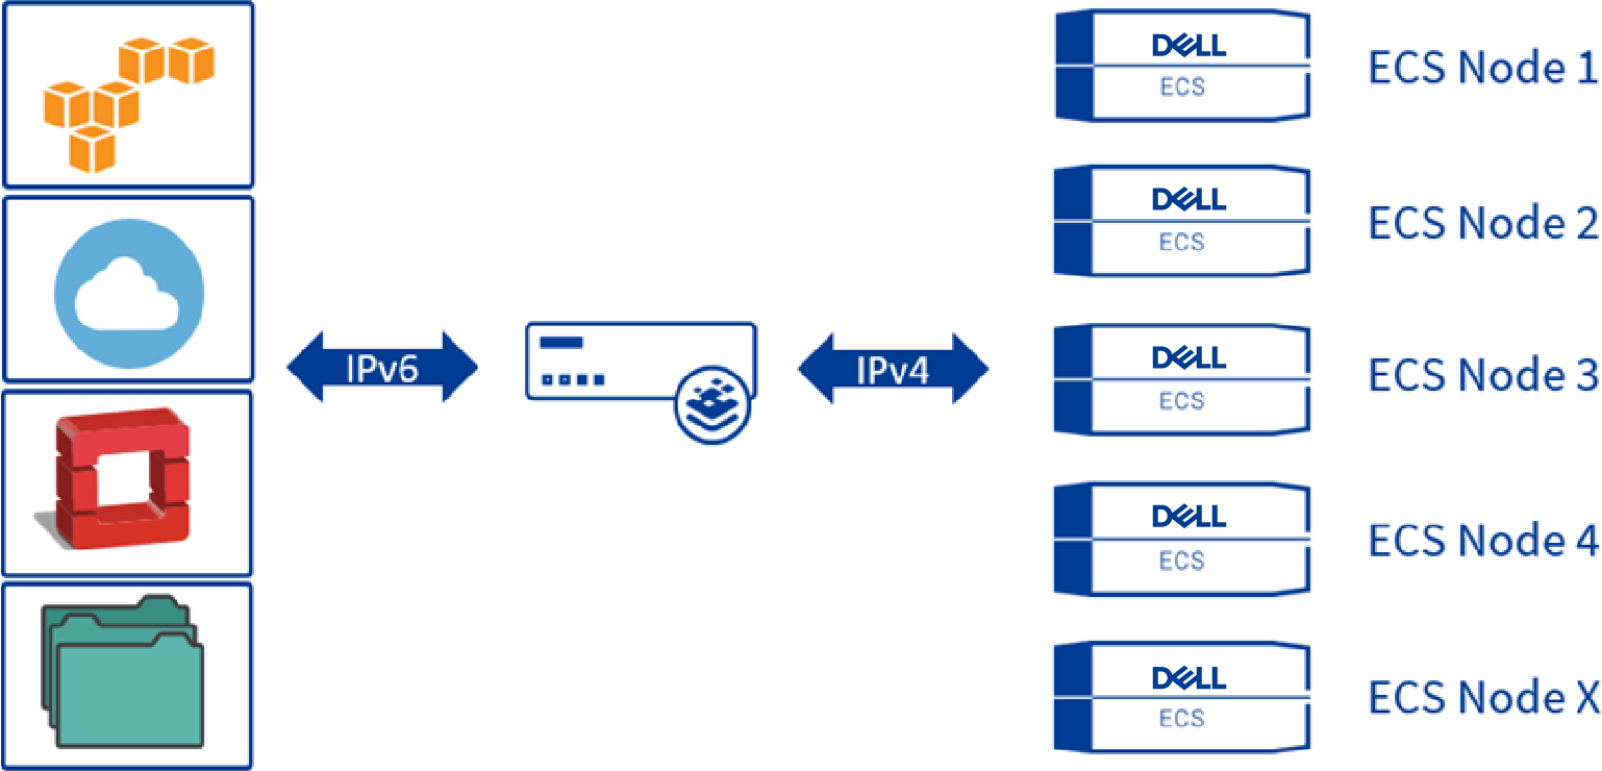 Applications communicating over IPv6 to the kemp loadmaster which is then translated to IPv4 to access the backend Dell ECS nodes